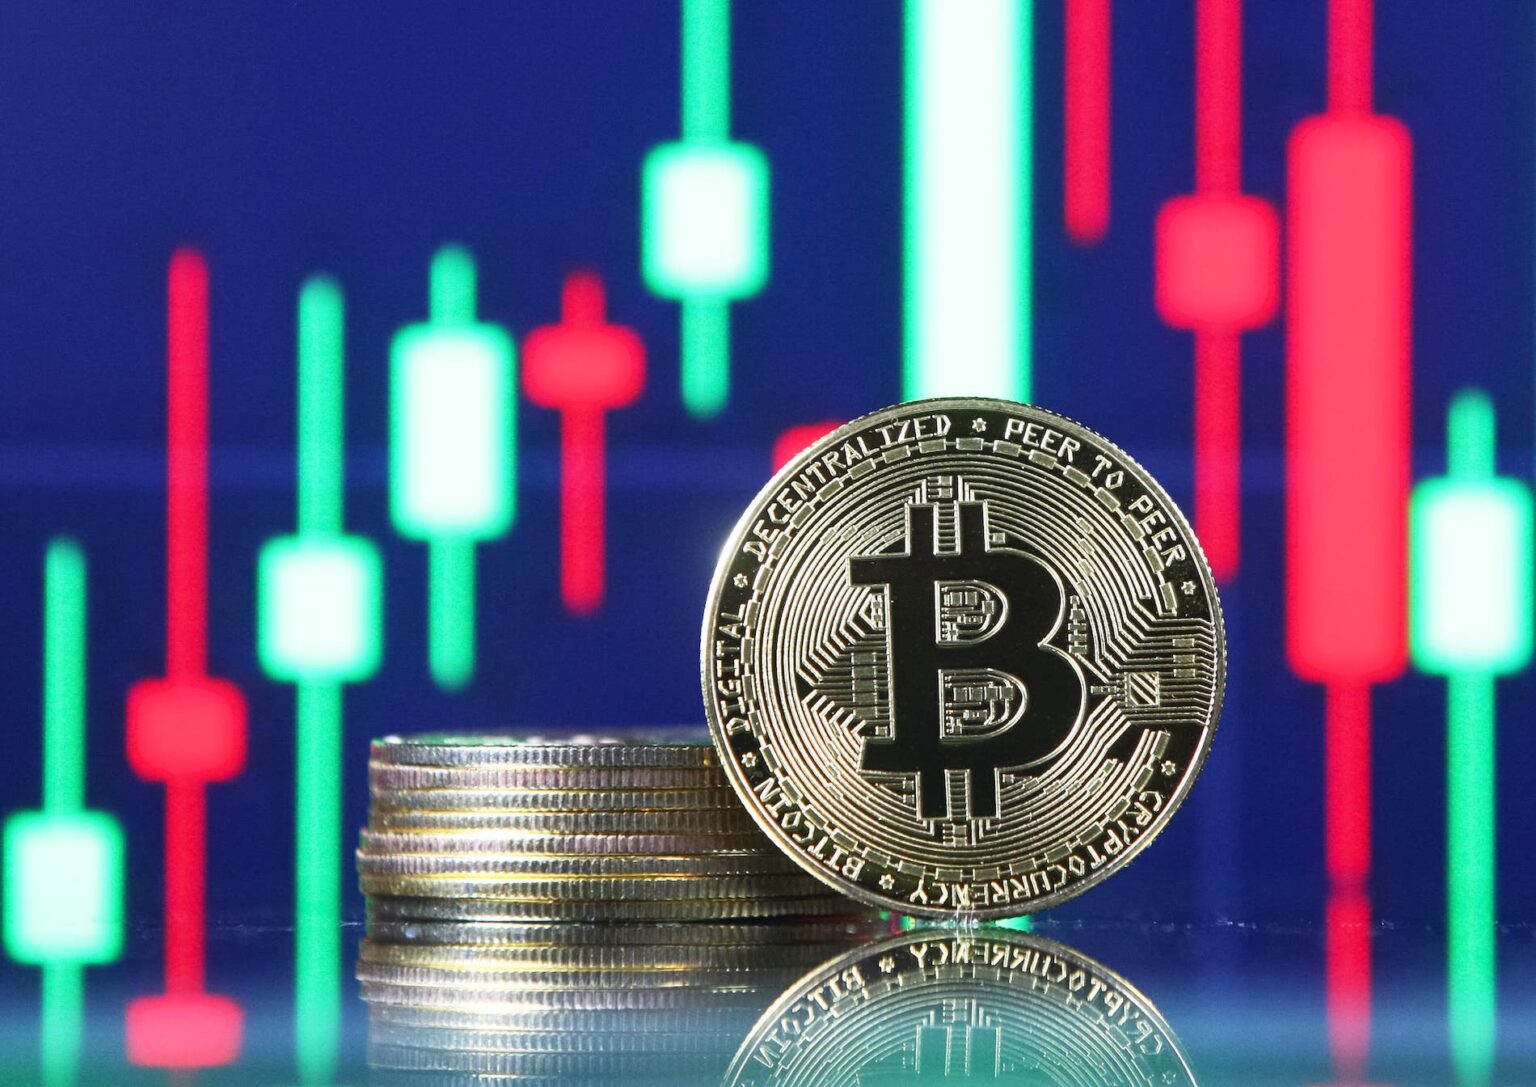 If you've been thinking about getting started in cryptocurrencies, now is the time to start. Read this reasons you should invest in bitcoin today.